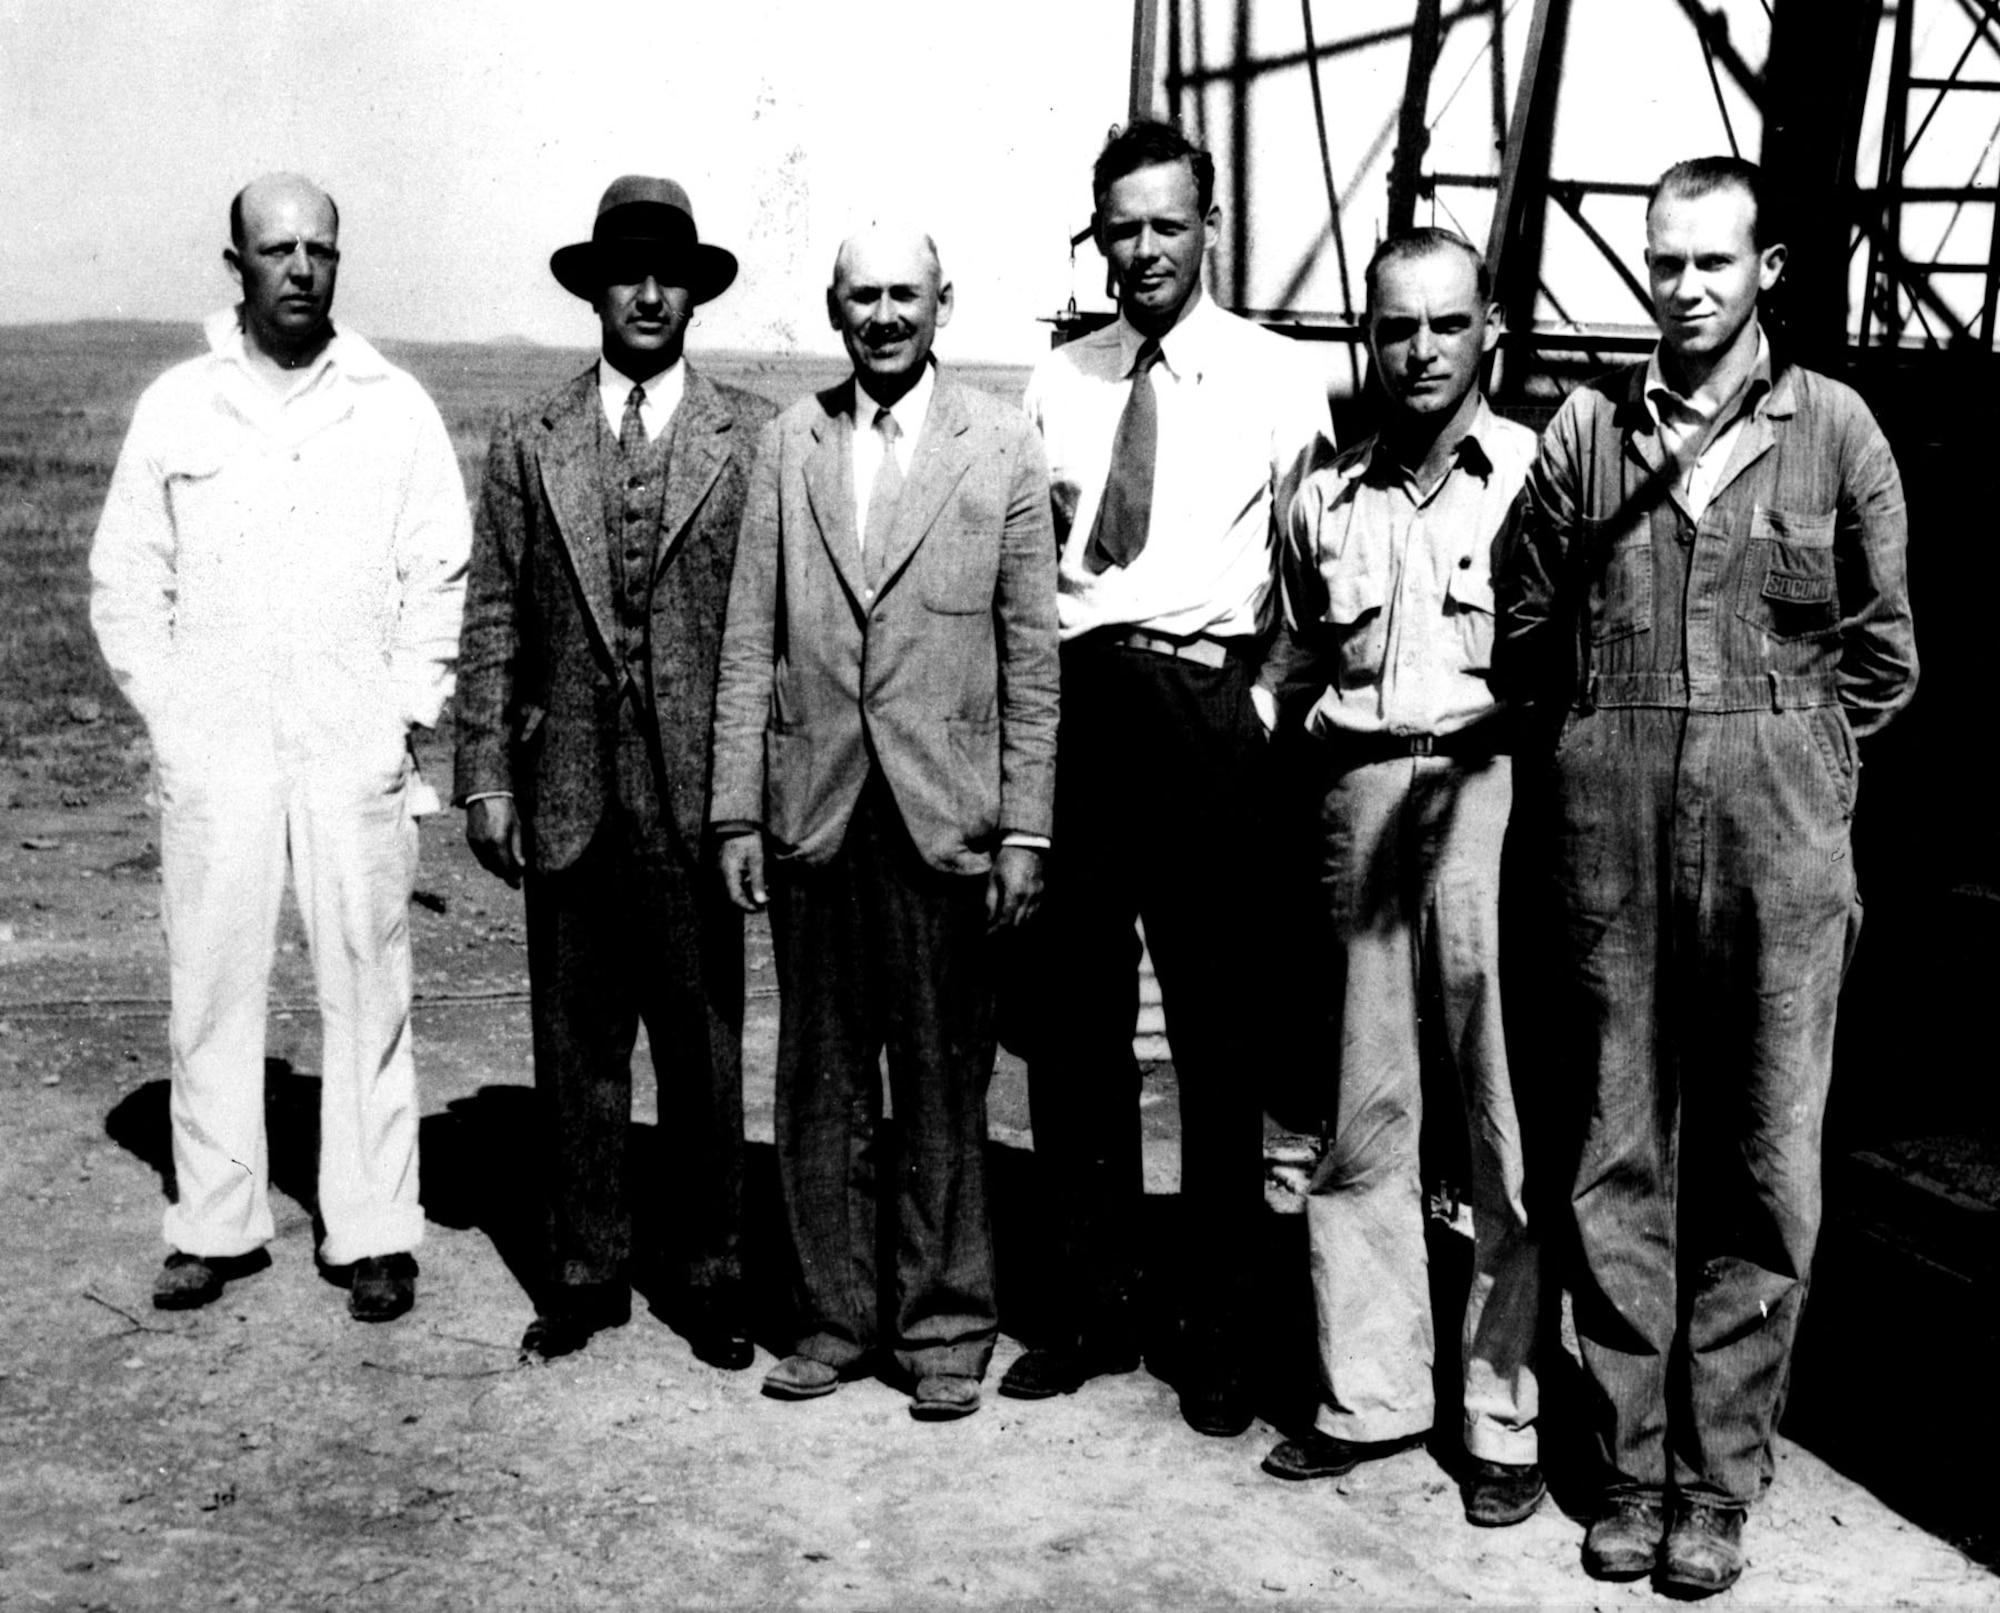 Goddard with supporters in New Mexico, 1935. (left to right) Assistant Albert Kisk, financier Harry Guggenheim, Goddard, Charles Lindbergh and assistants Nils Ljungquist and Charles Mansur. (U.S. Air Force photo)